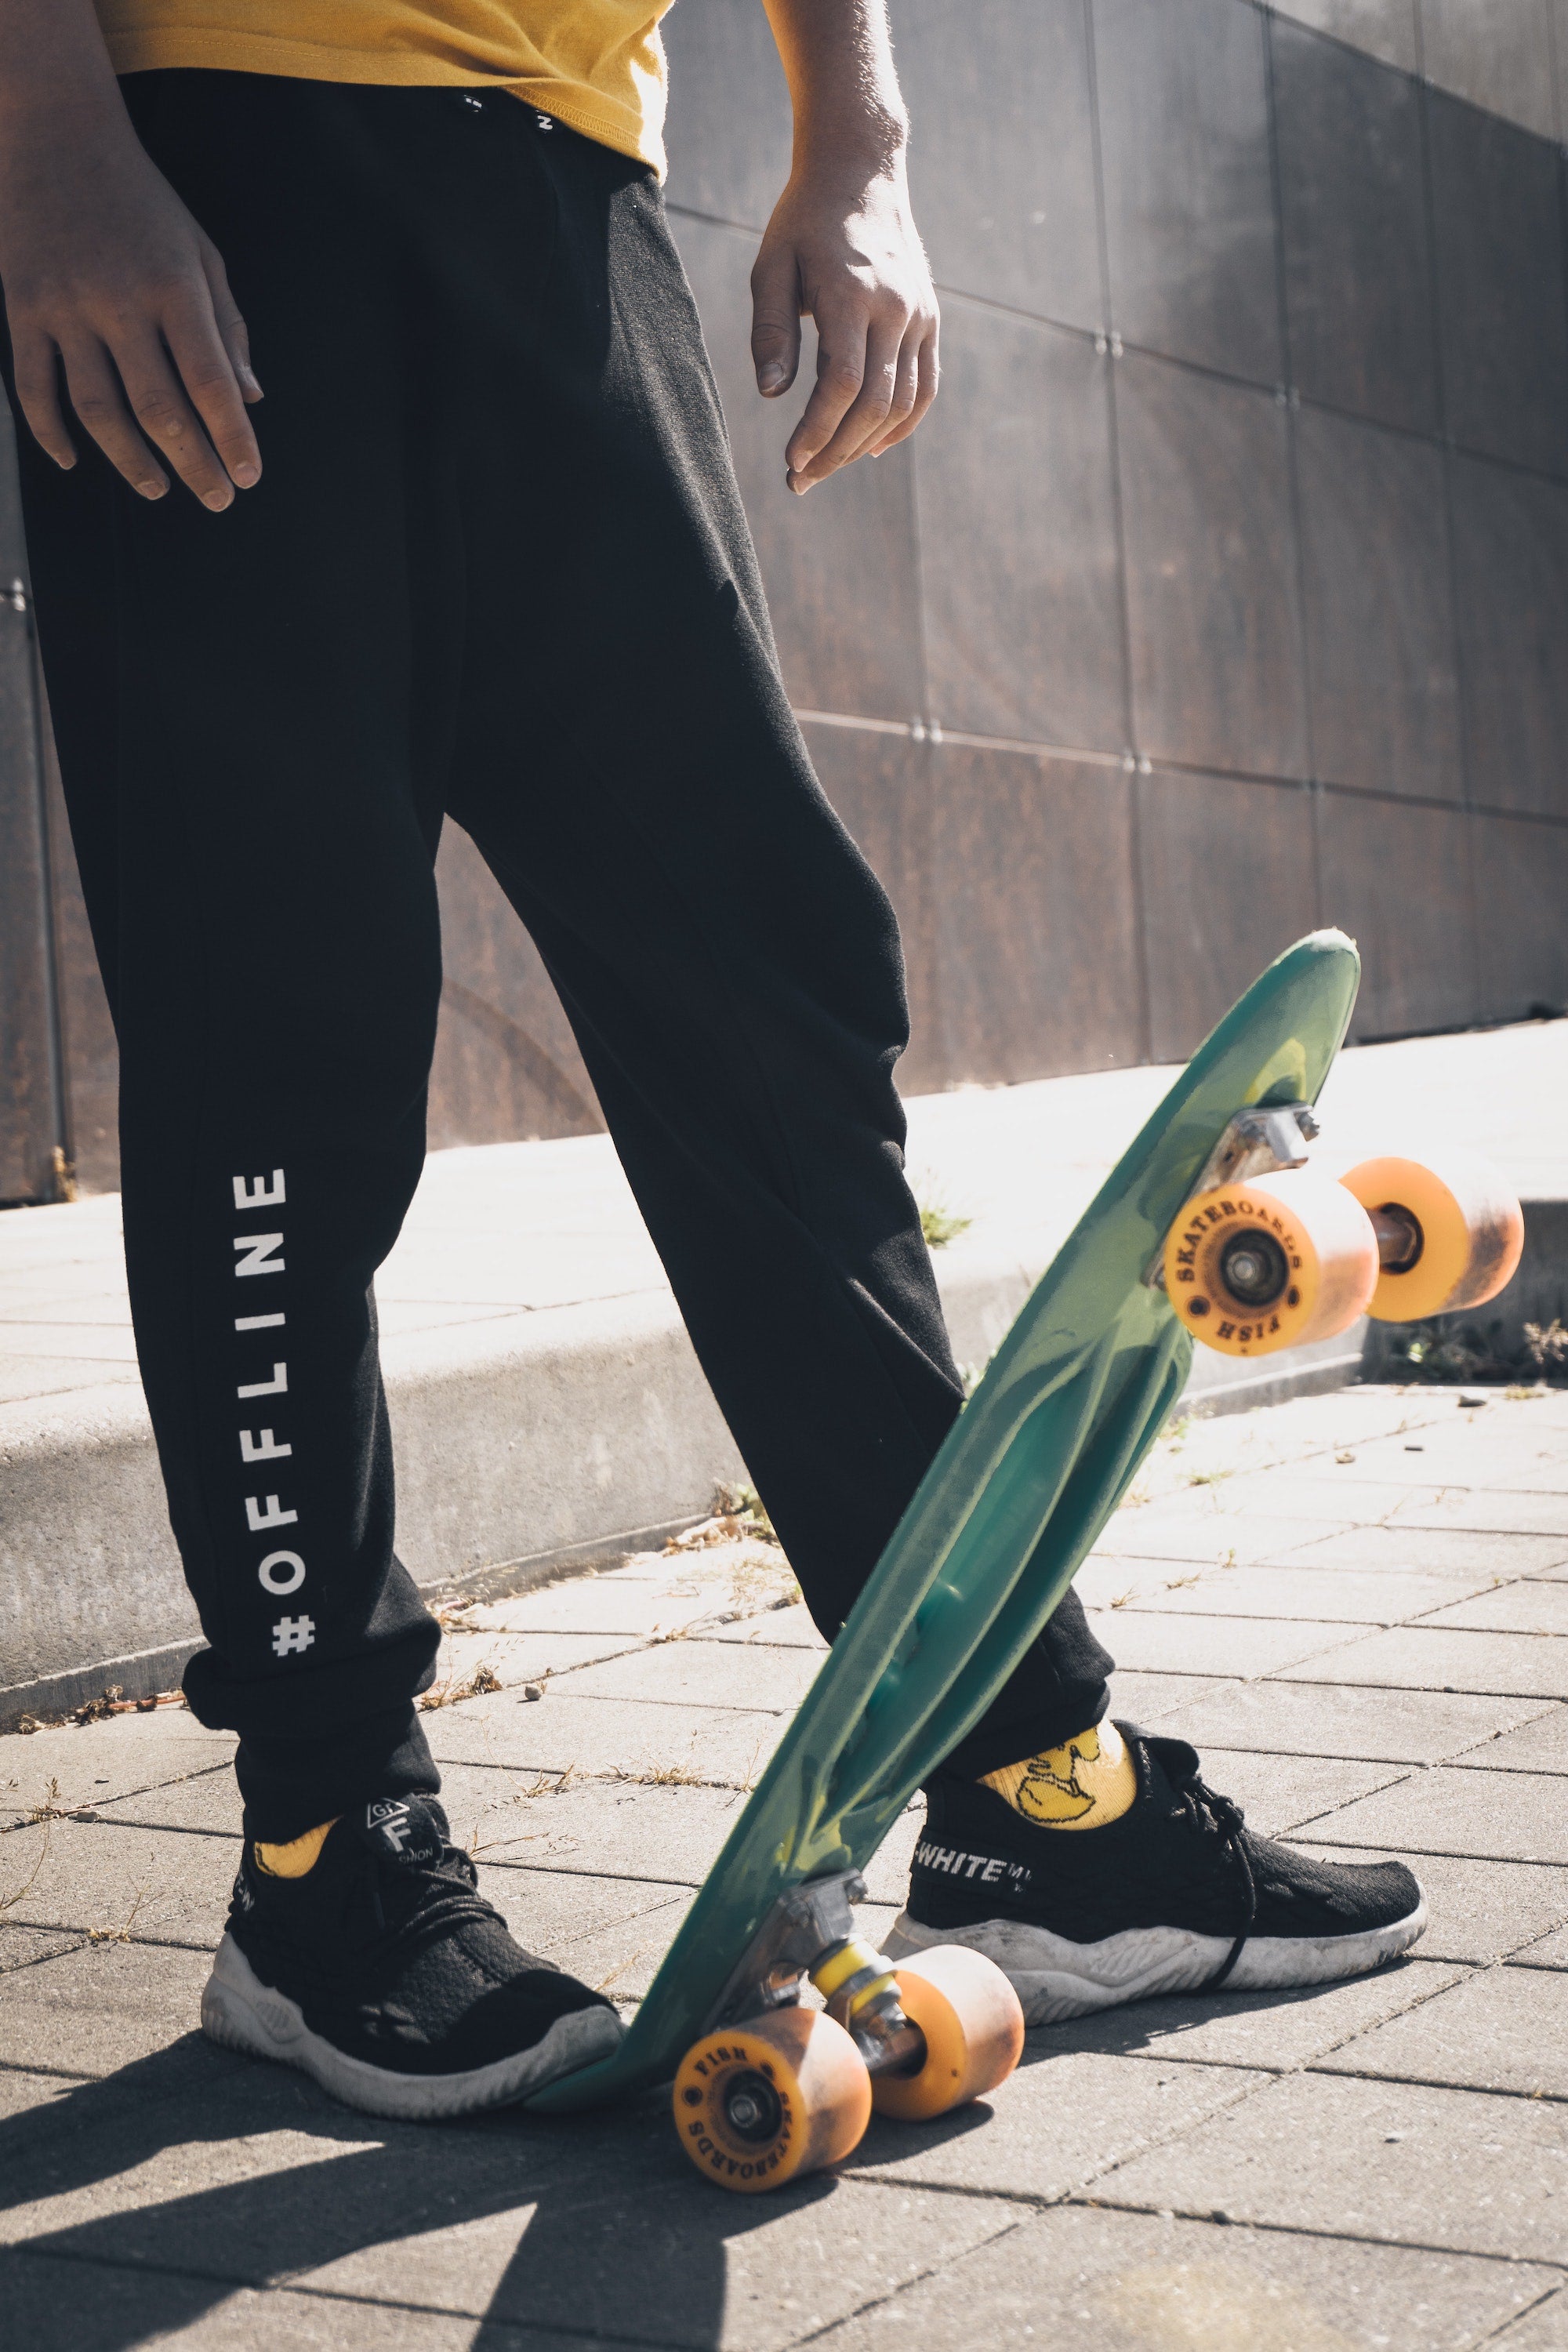 Can Beginners Ride Penny Boards? [A Rad Guide]